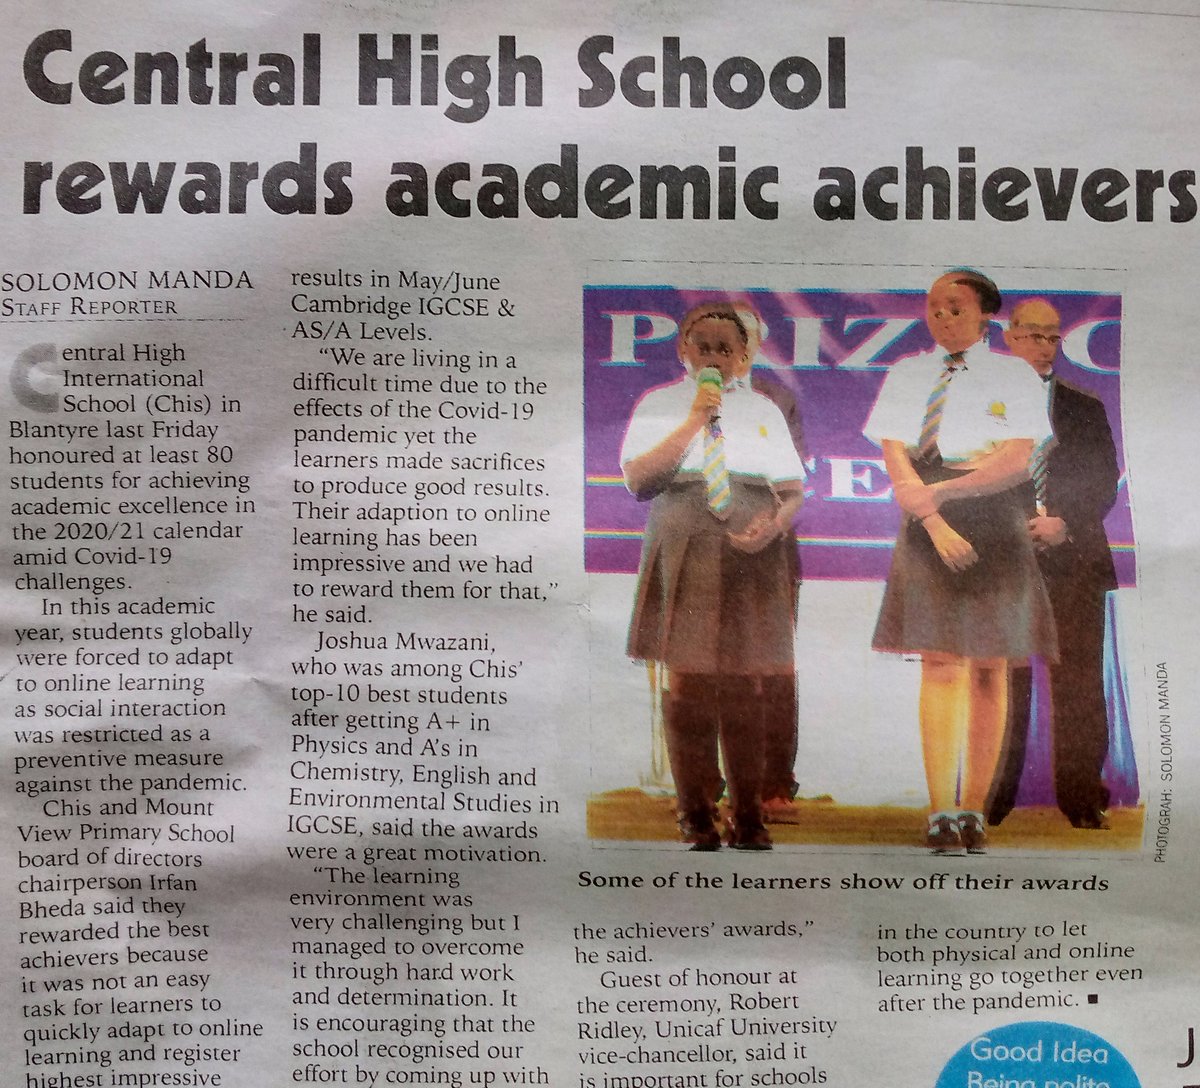 The annual Prize Giving Ceremony at Central High International School honours and rewards students for their academic achievements.
The Nation Newspaper summarizes this year's ceremony, which took place on November 25, 2021.
#prizegiving2020_21 #AcademicExcellence #media